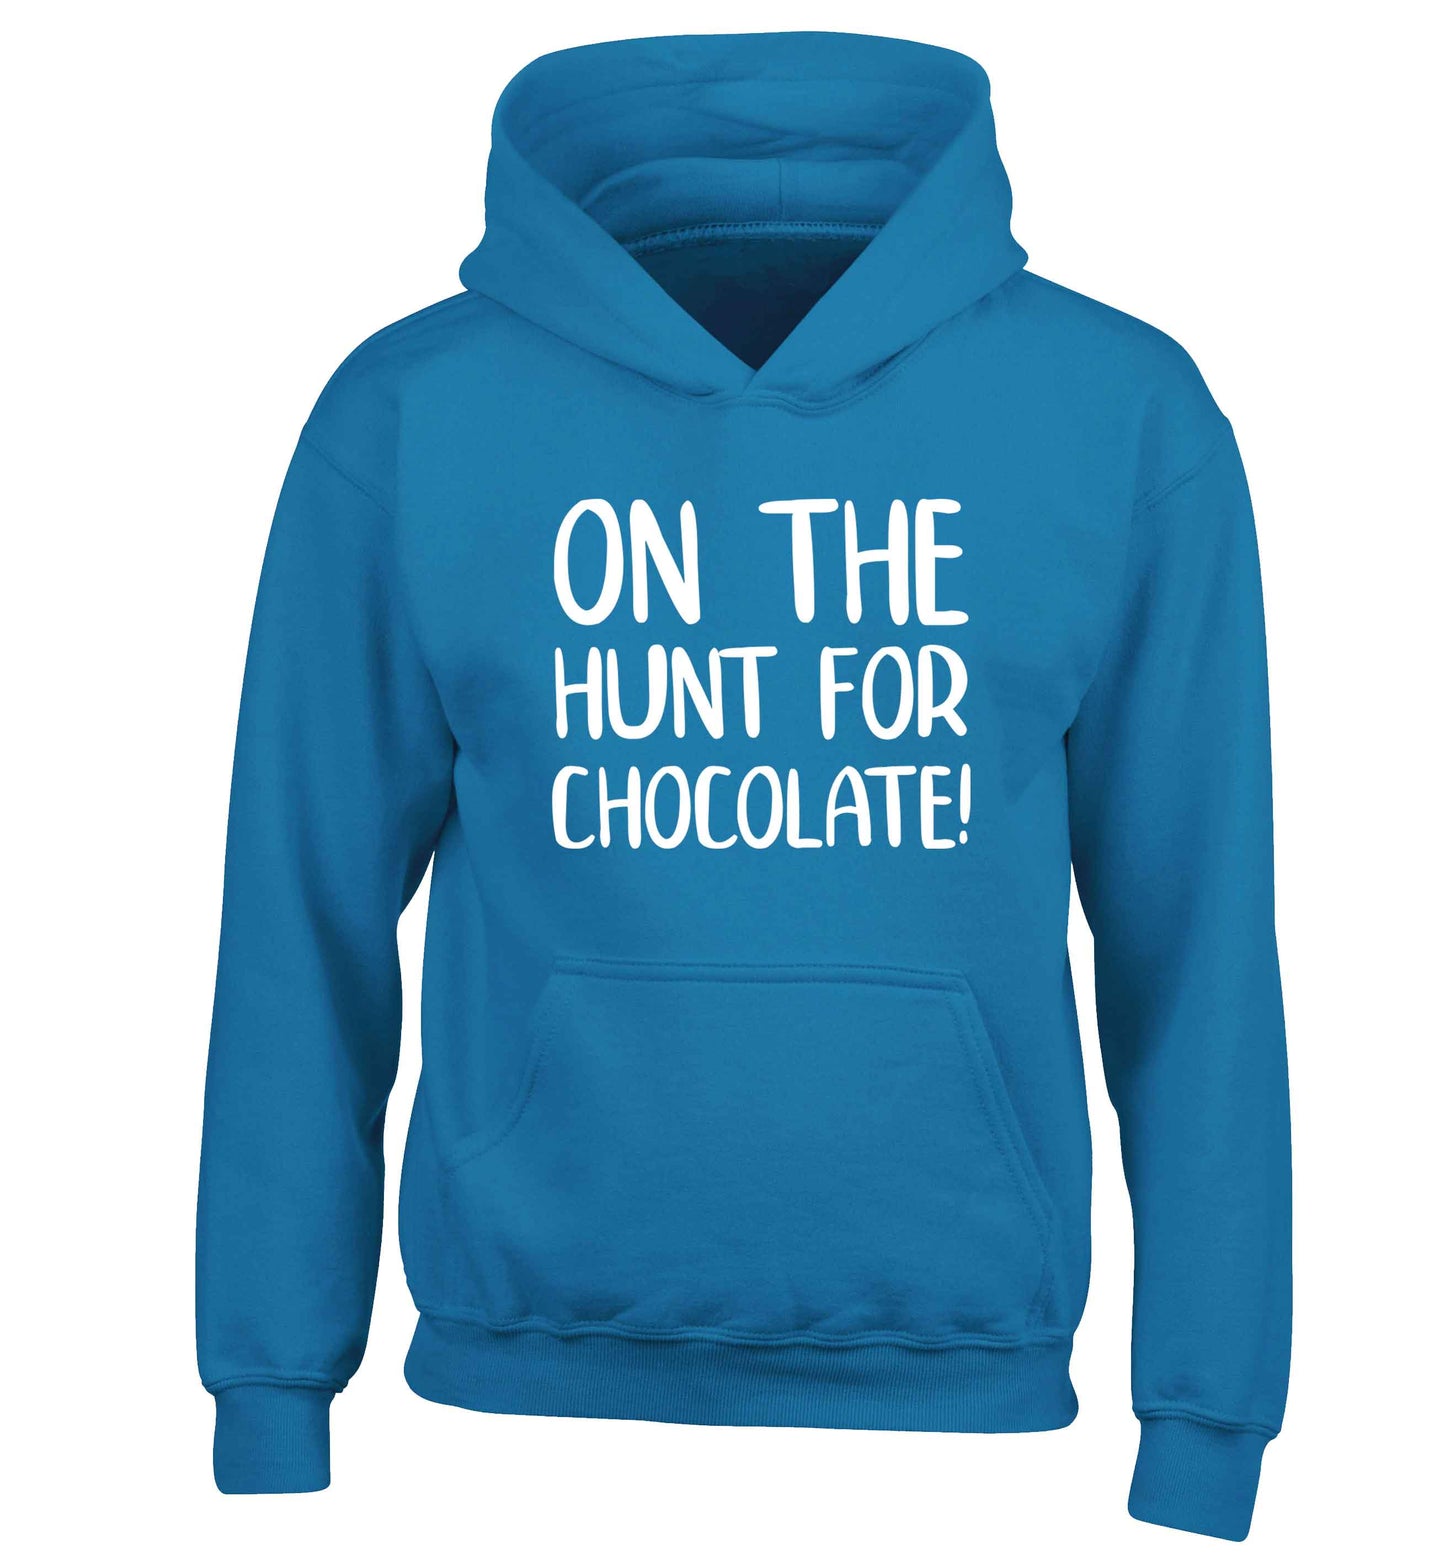 On the hunt for chocolate! children's blue hoodie 12-13 Years